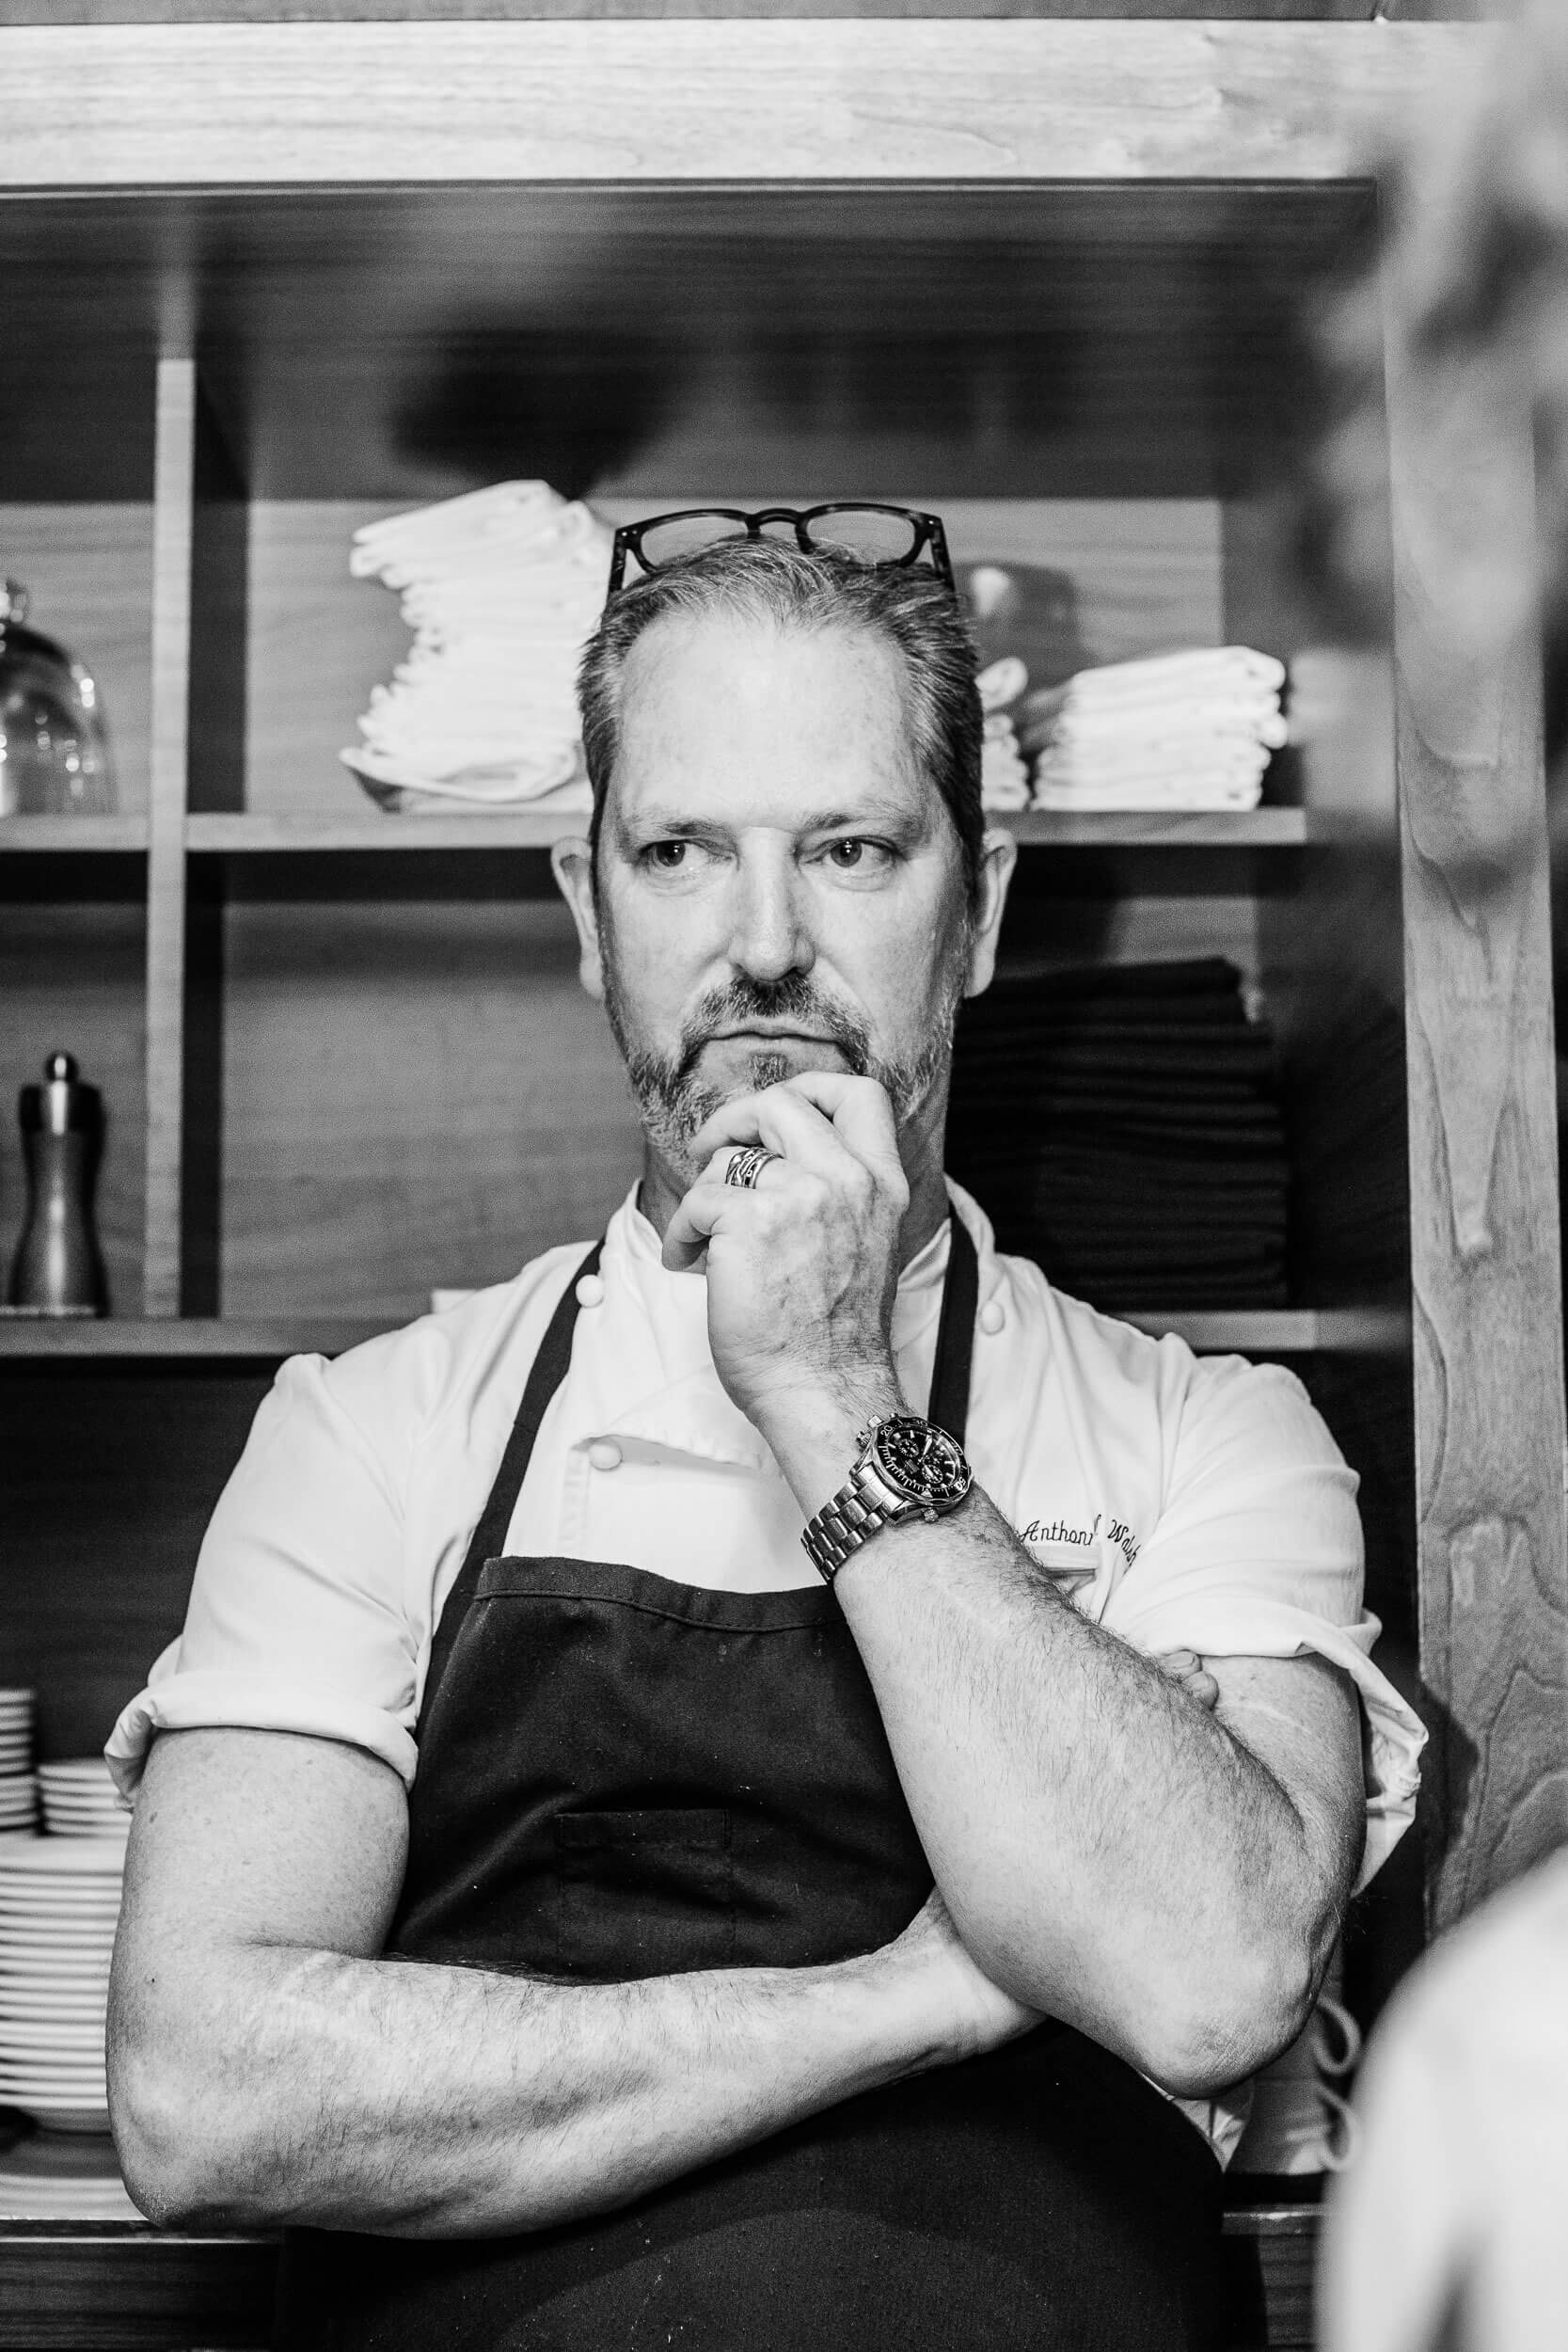 Black and white portrait of Chef Anthony Walsh